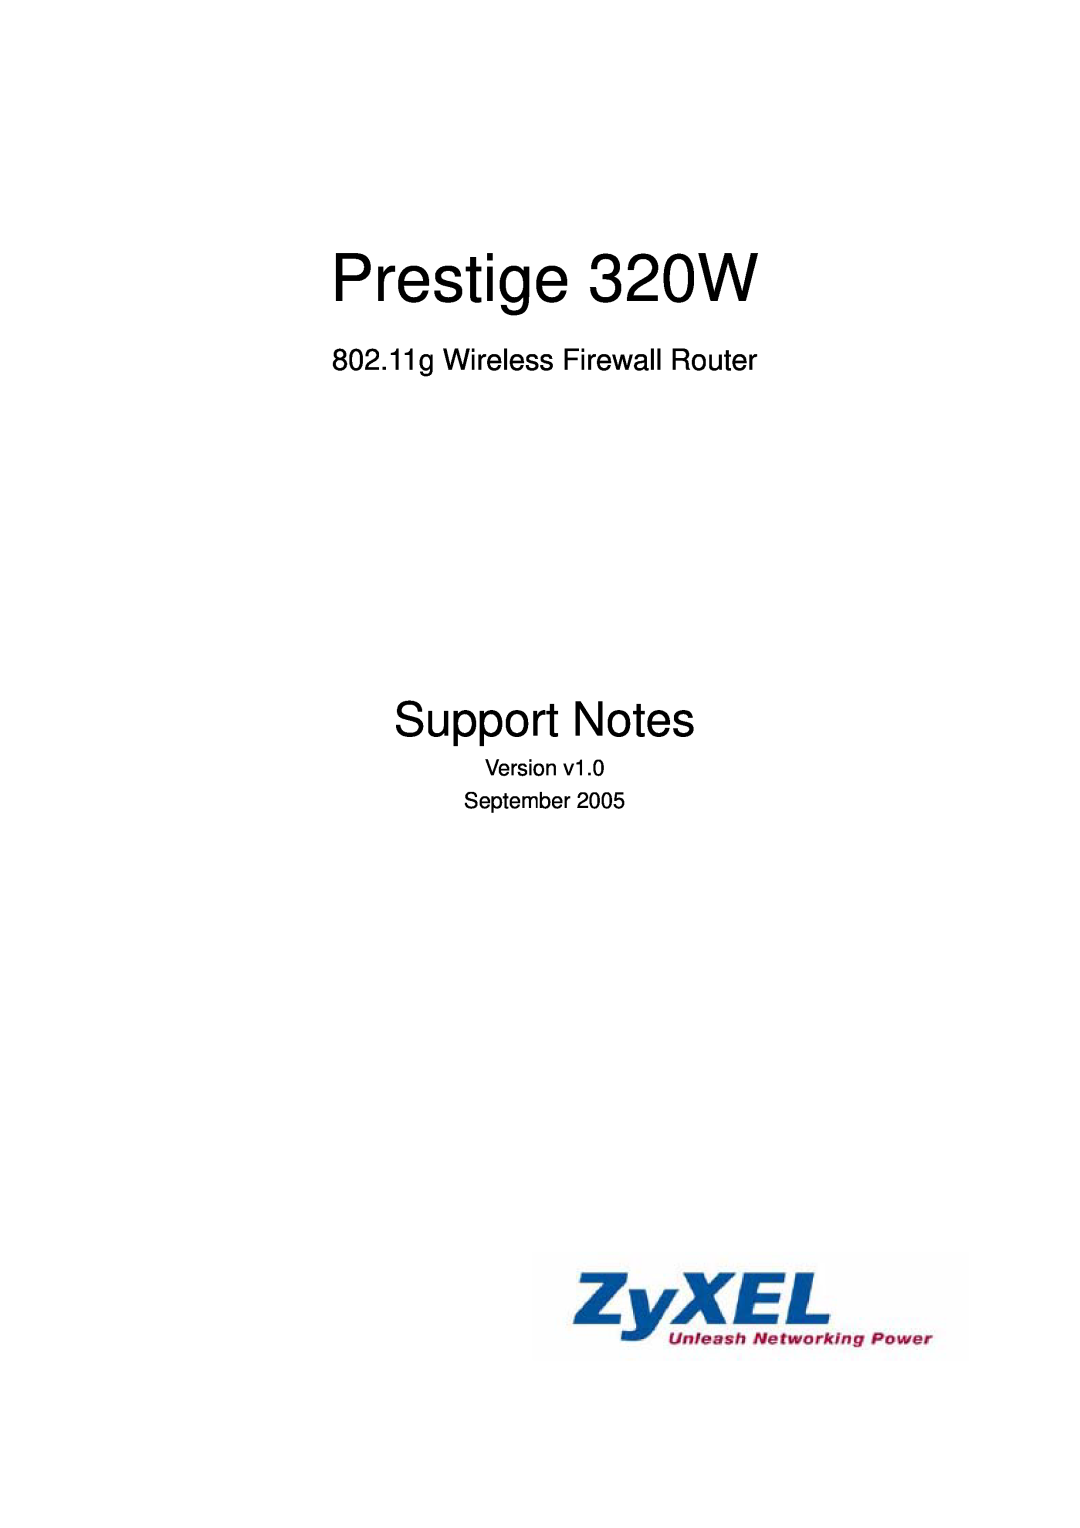 ZyXEL Communications manual Prestige 320W, Support Notes, 802.11g Wireless Firewall Router 